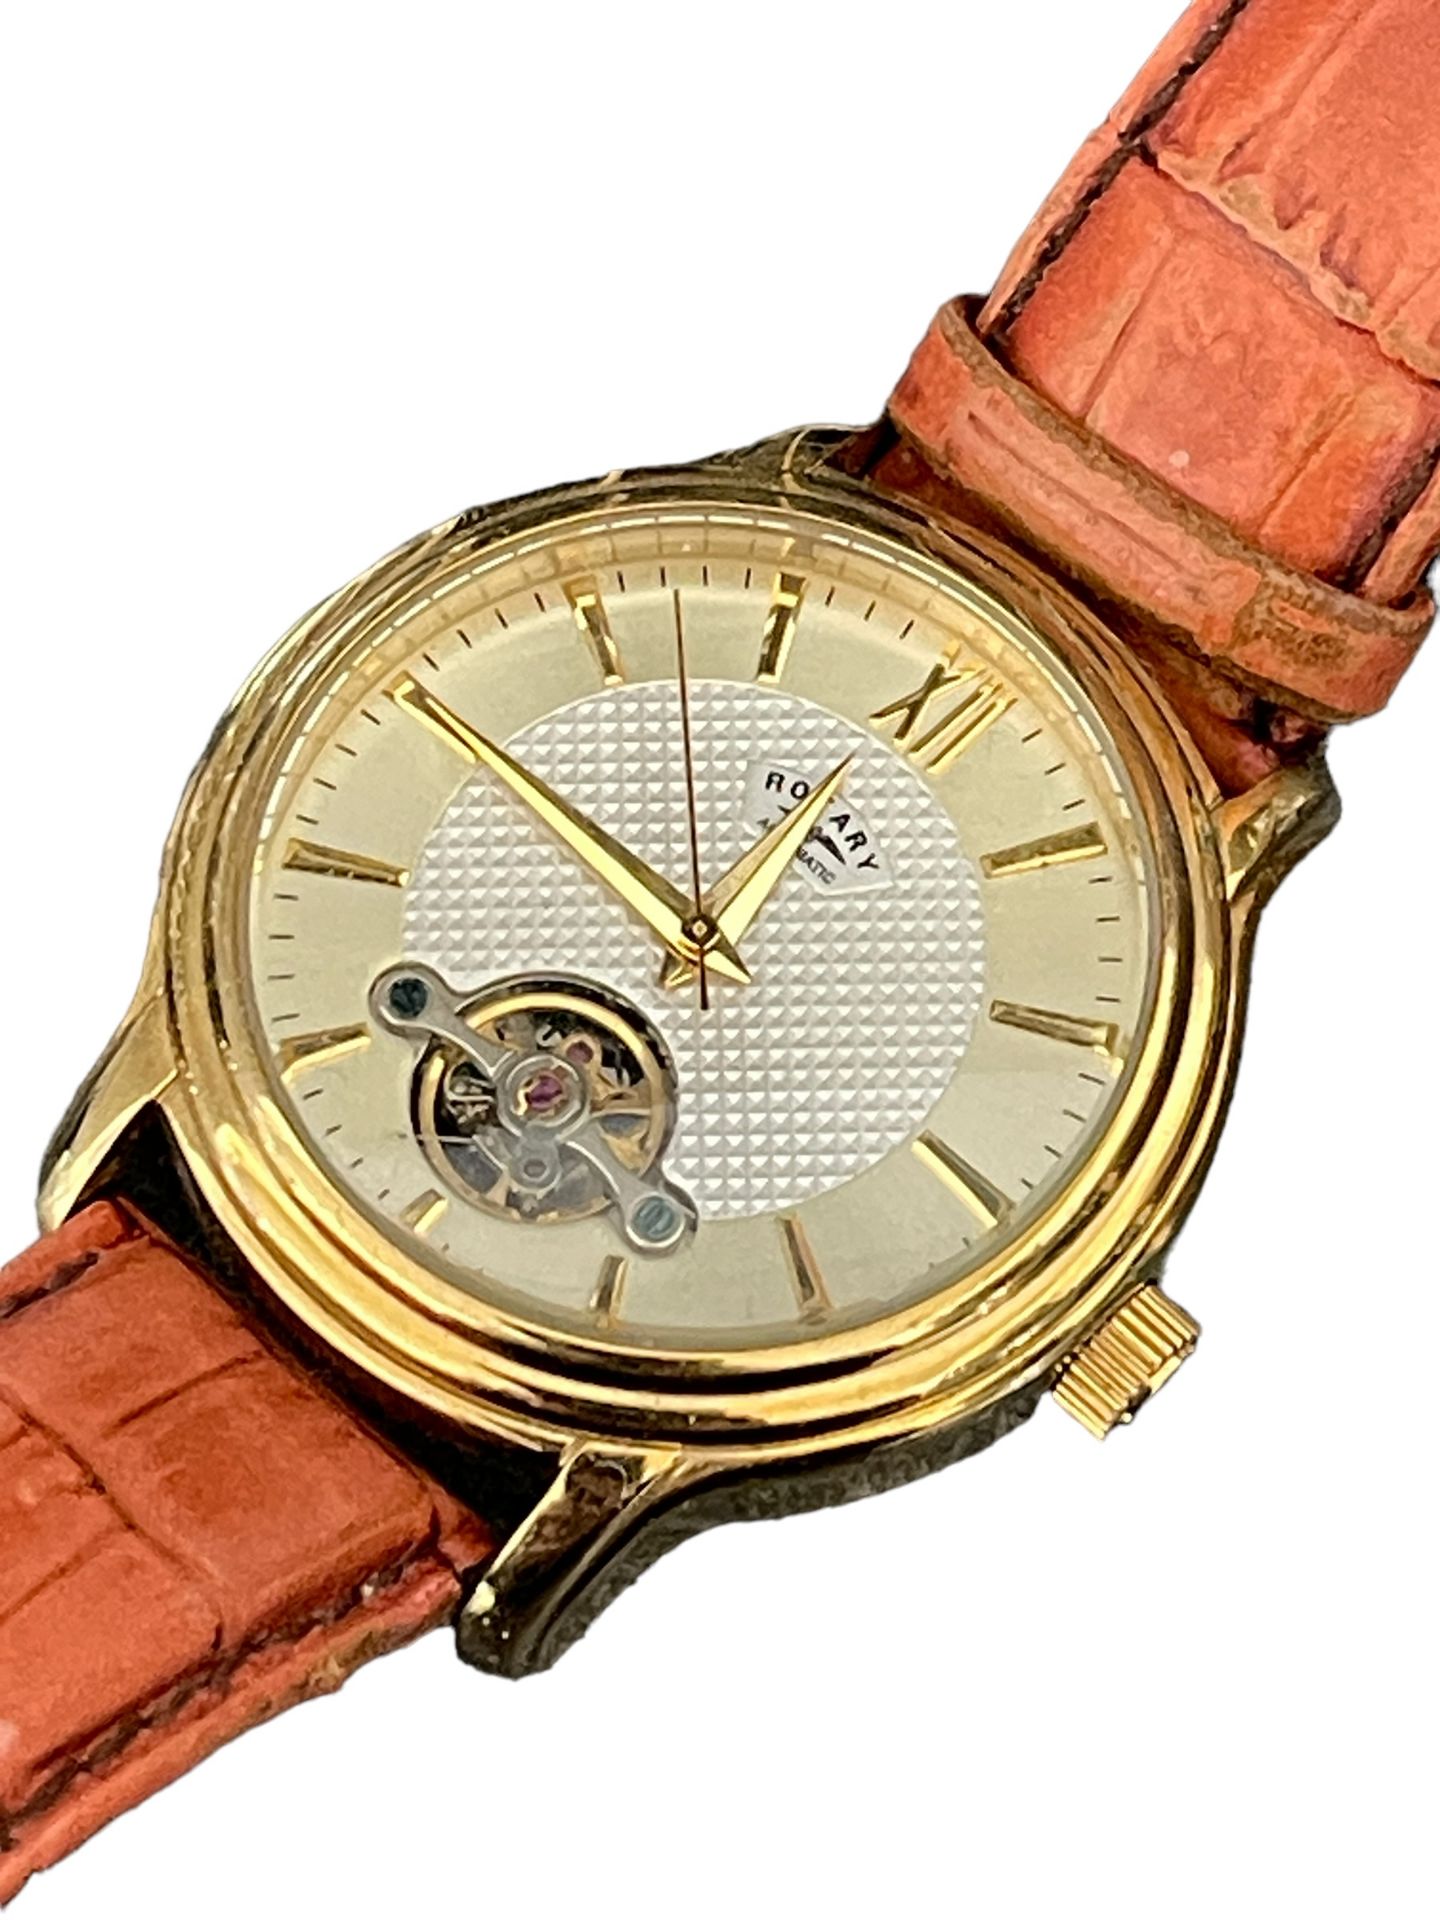 Rotary gold automatic watch return or demo - Image 2 of 4